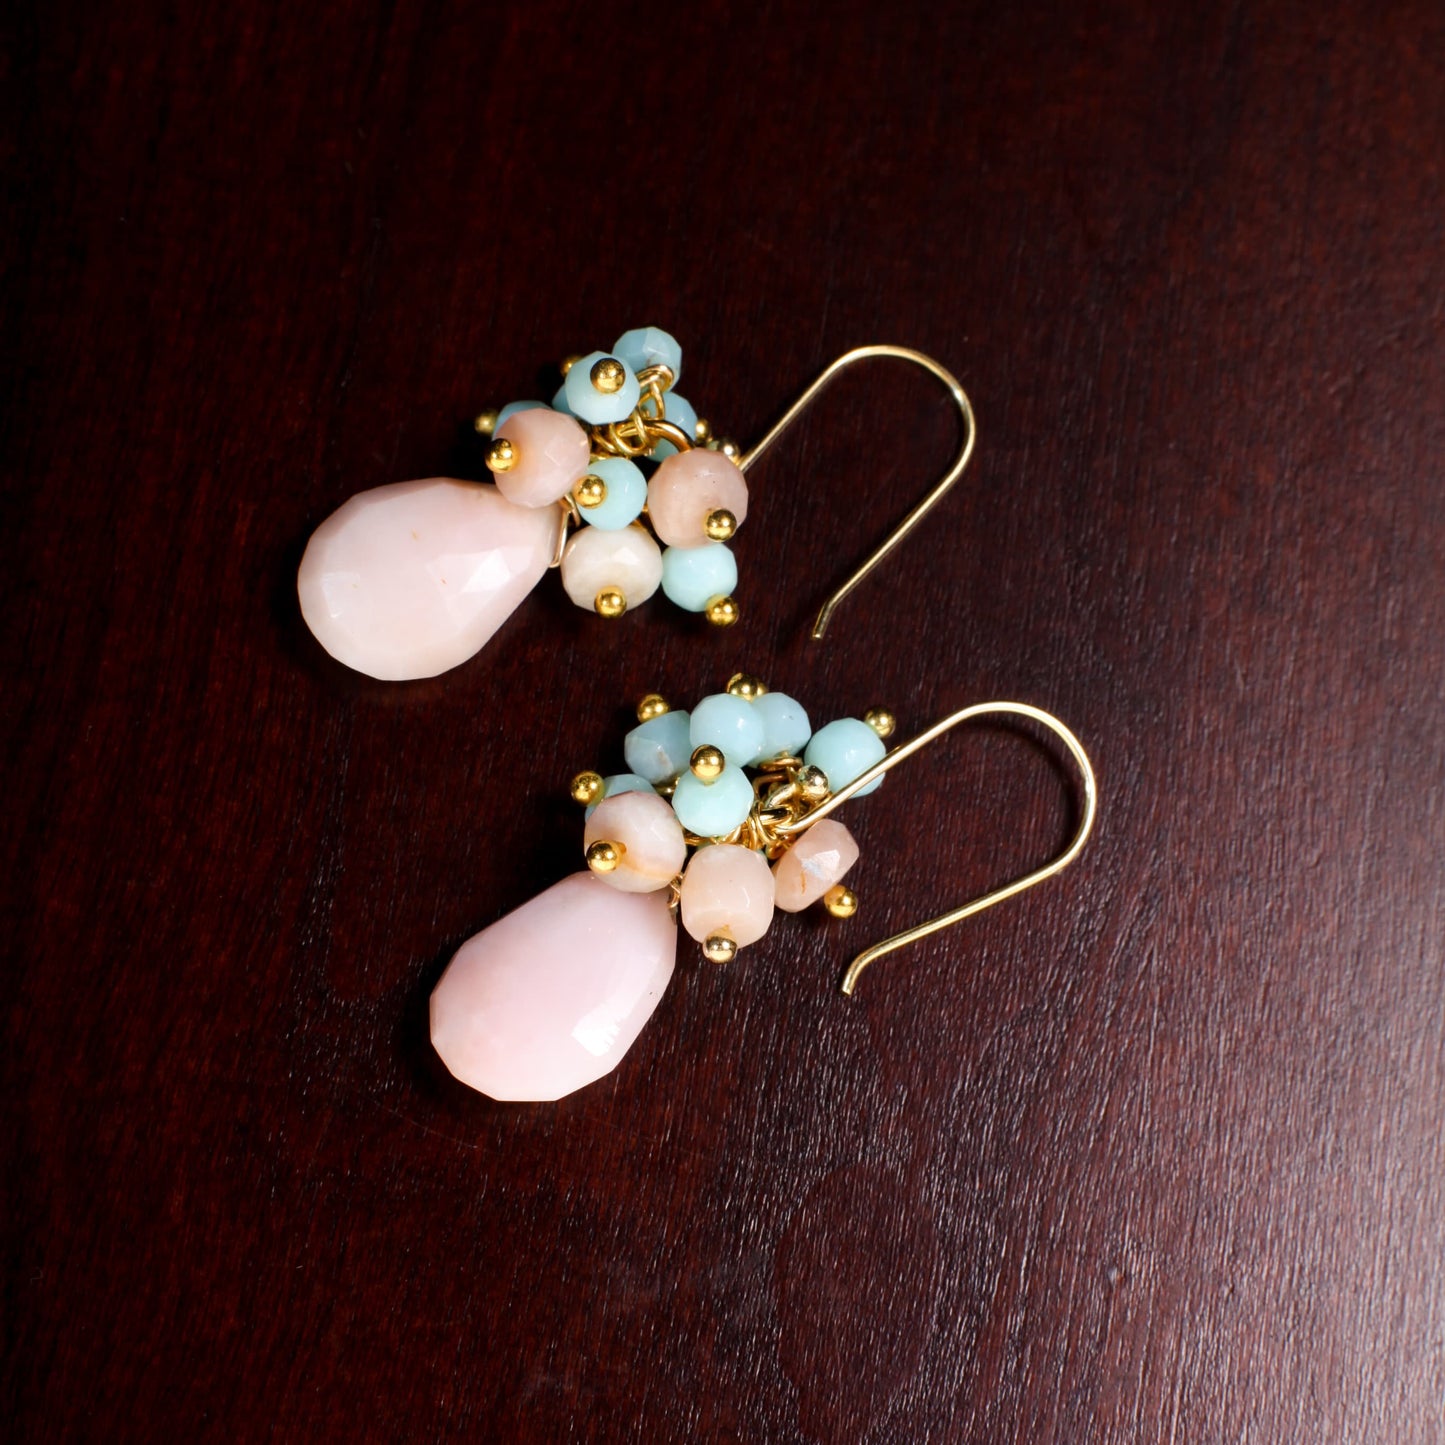 Pink, Blue Peruvian Opal Cluster Earring, Pink Opal Briolette in Gold Vermeil, Gold Over Sterling Silver Ear Wire, Soothing Gem, Boho, Gift